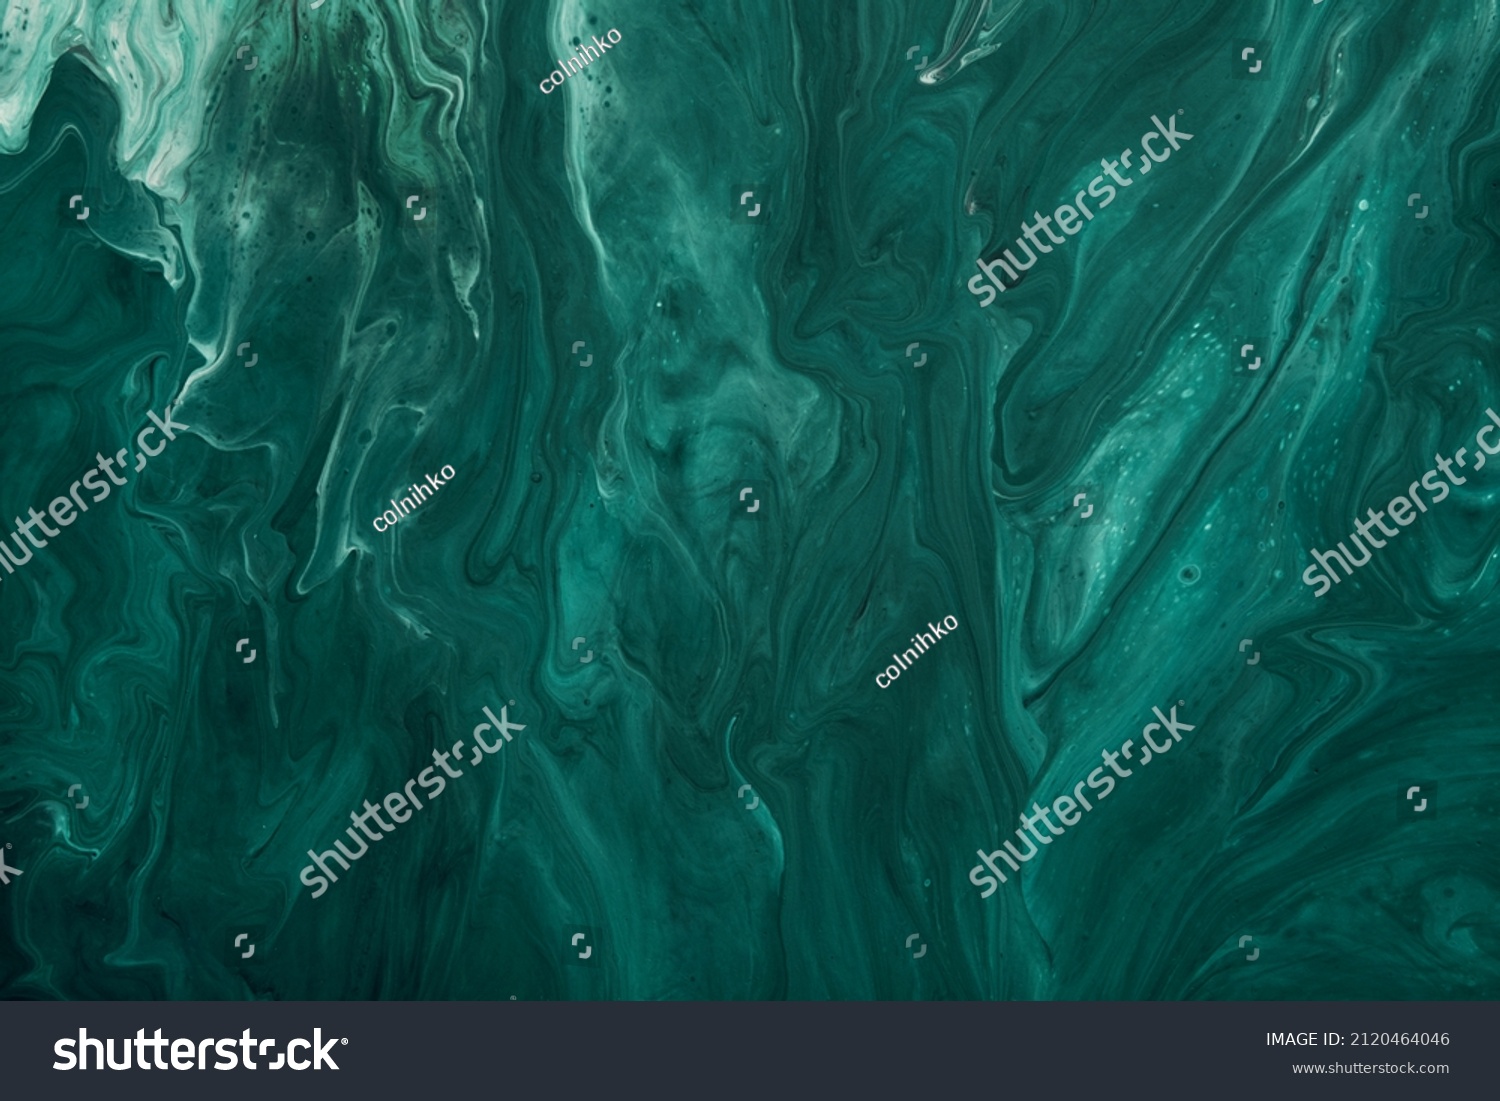 Fluid Art. Liquid Velvet Jade green abstract drips and wave. Marble effect background or texture #2120464046